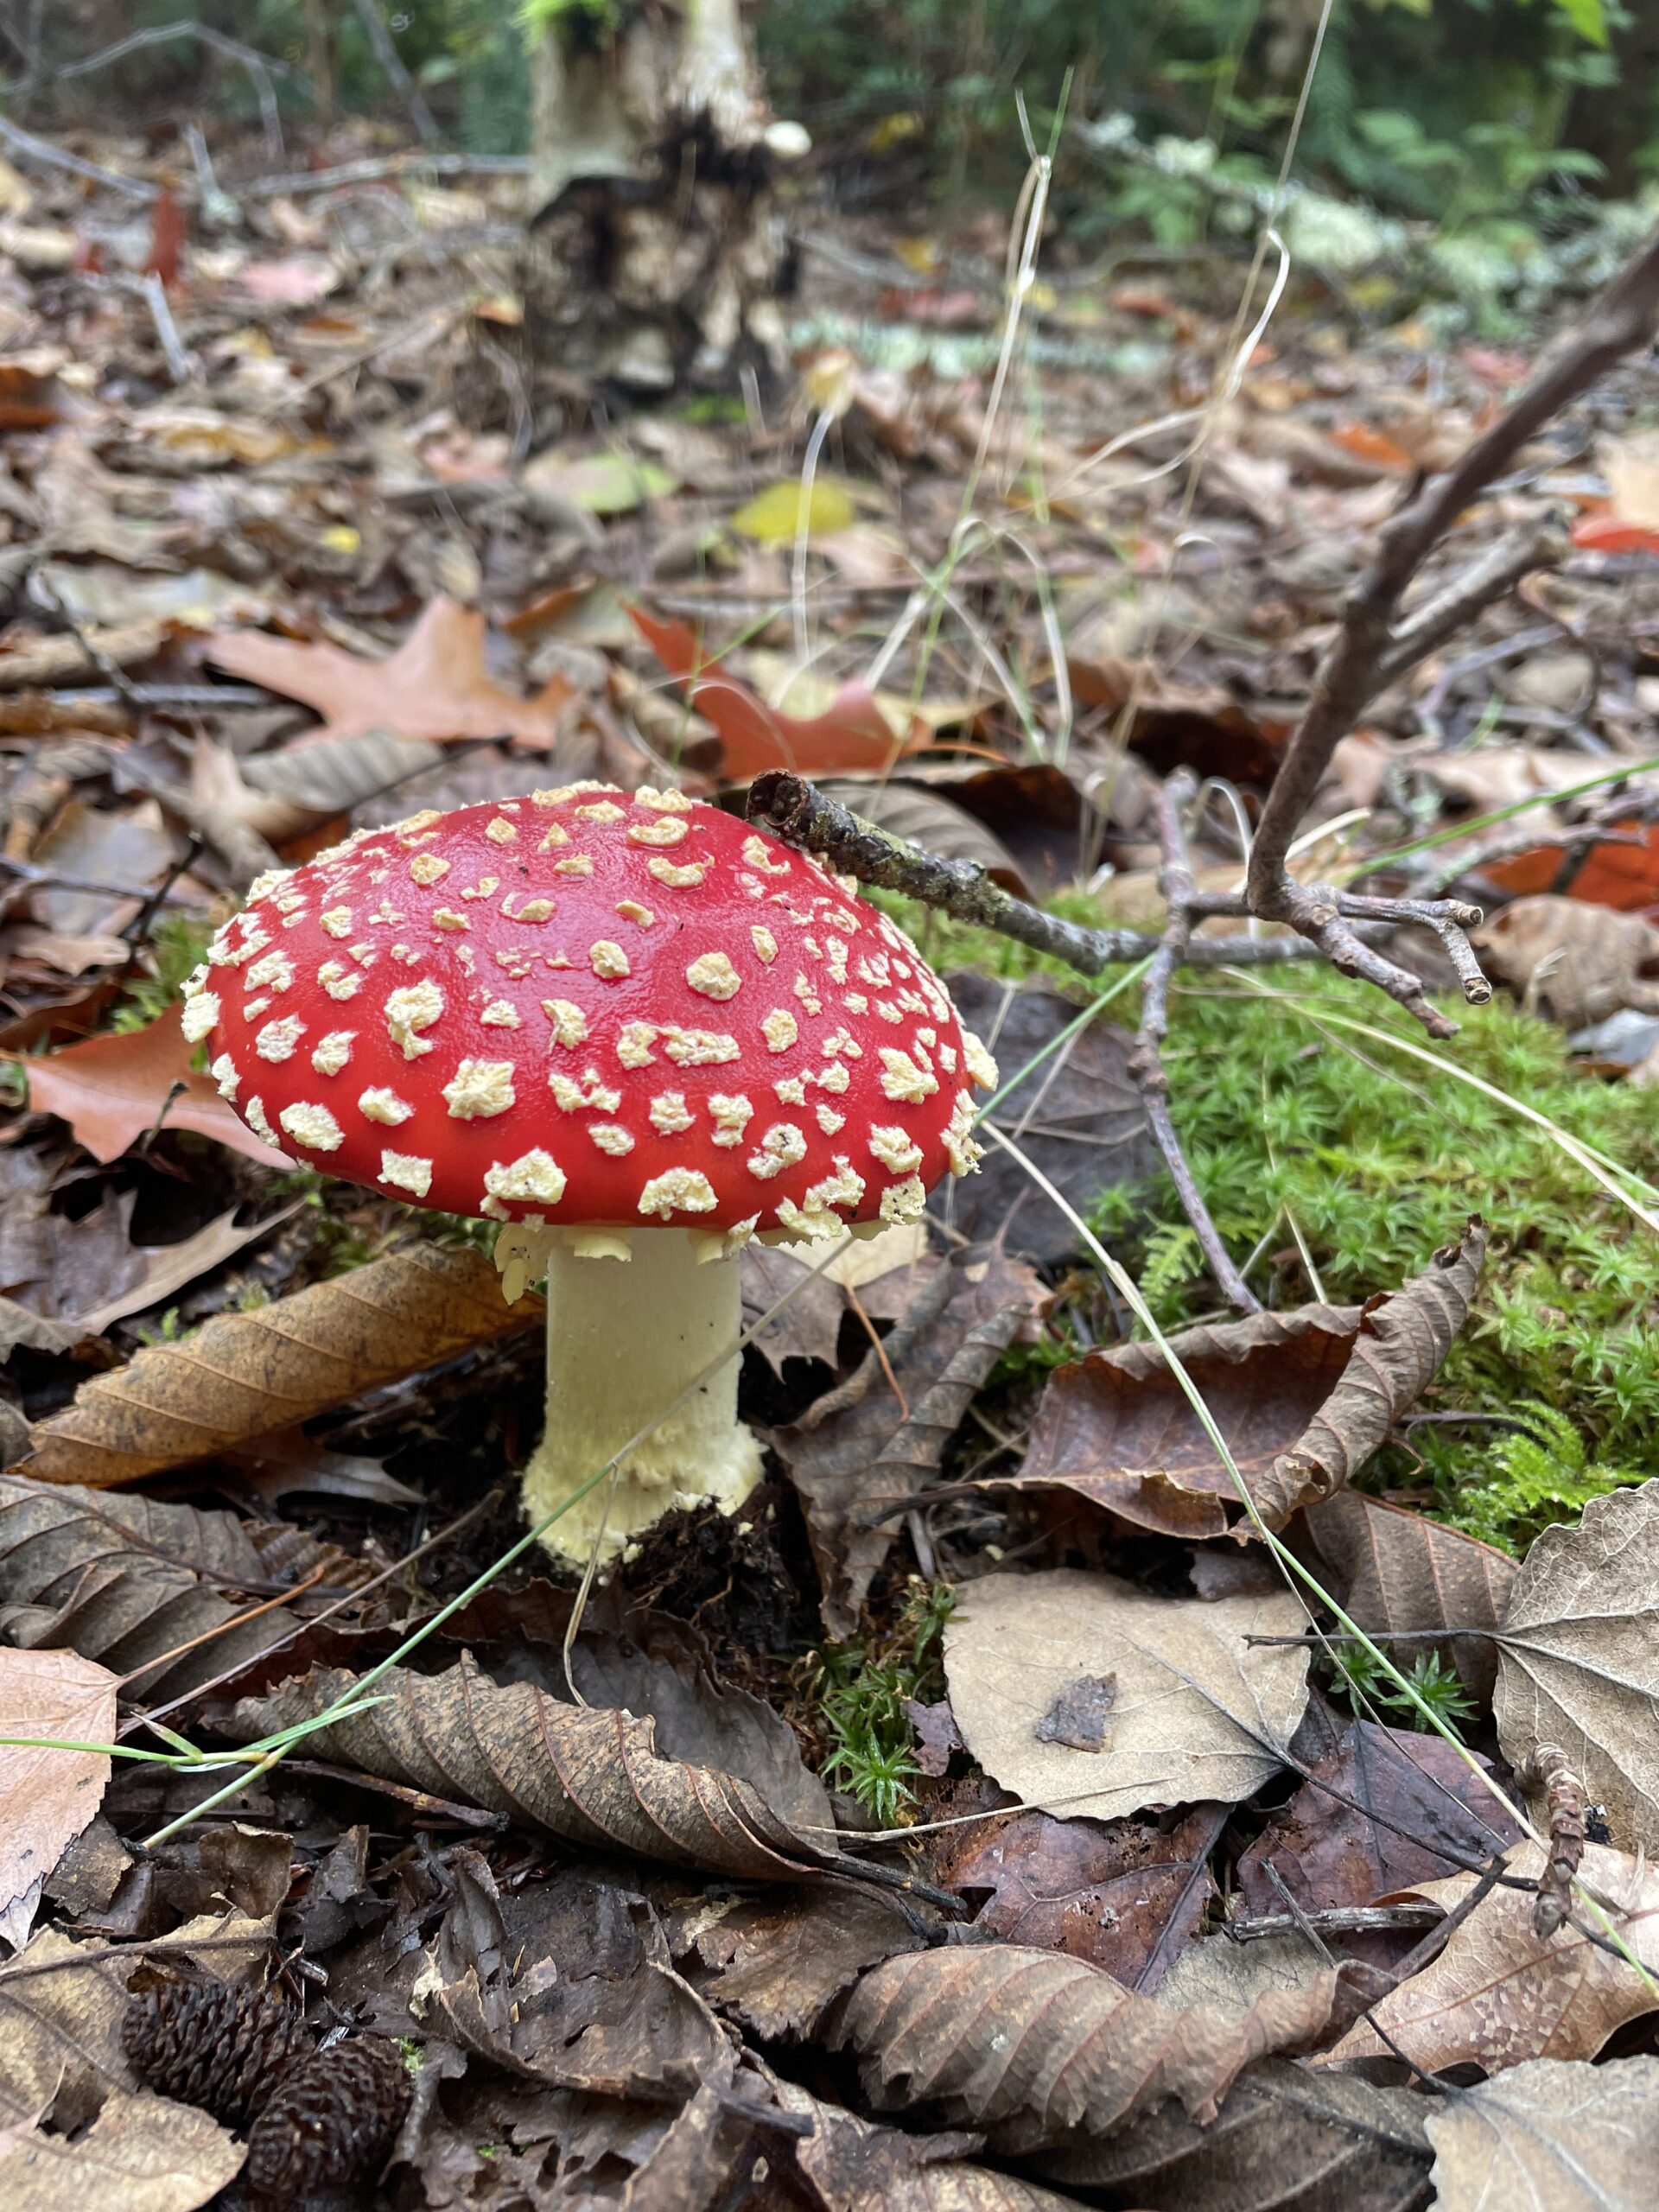 A photo of a mushroom growing out of a forest understory. It has a white stem with a bright red cap dotted with white warts.